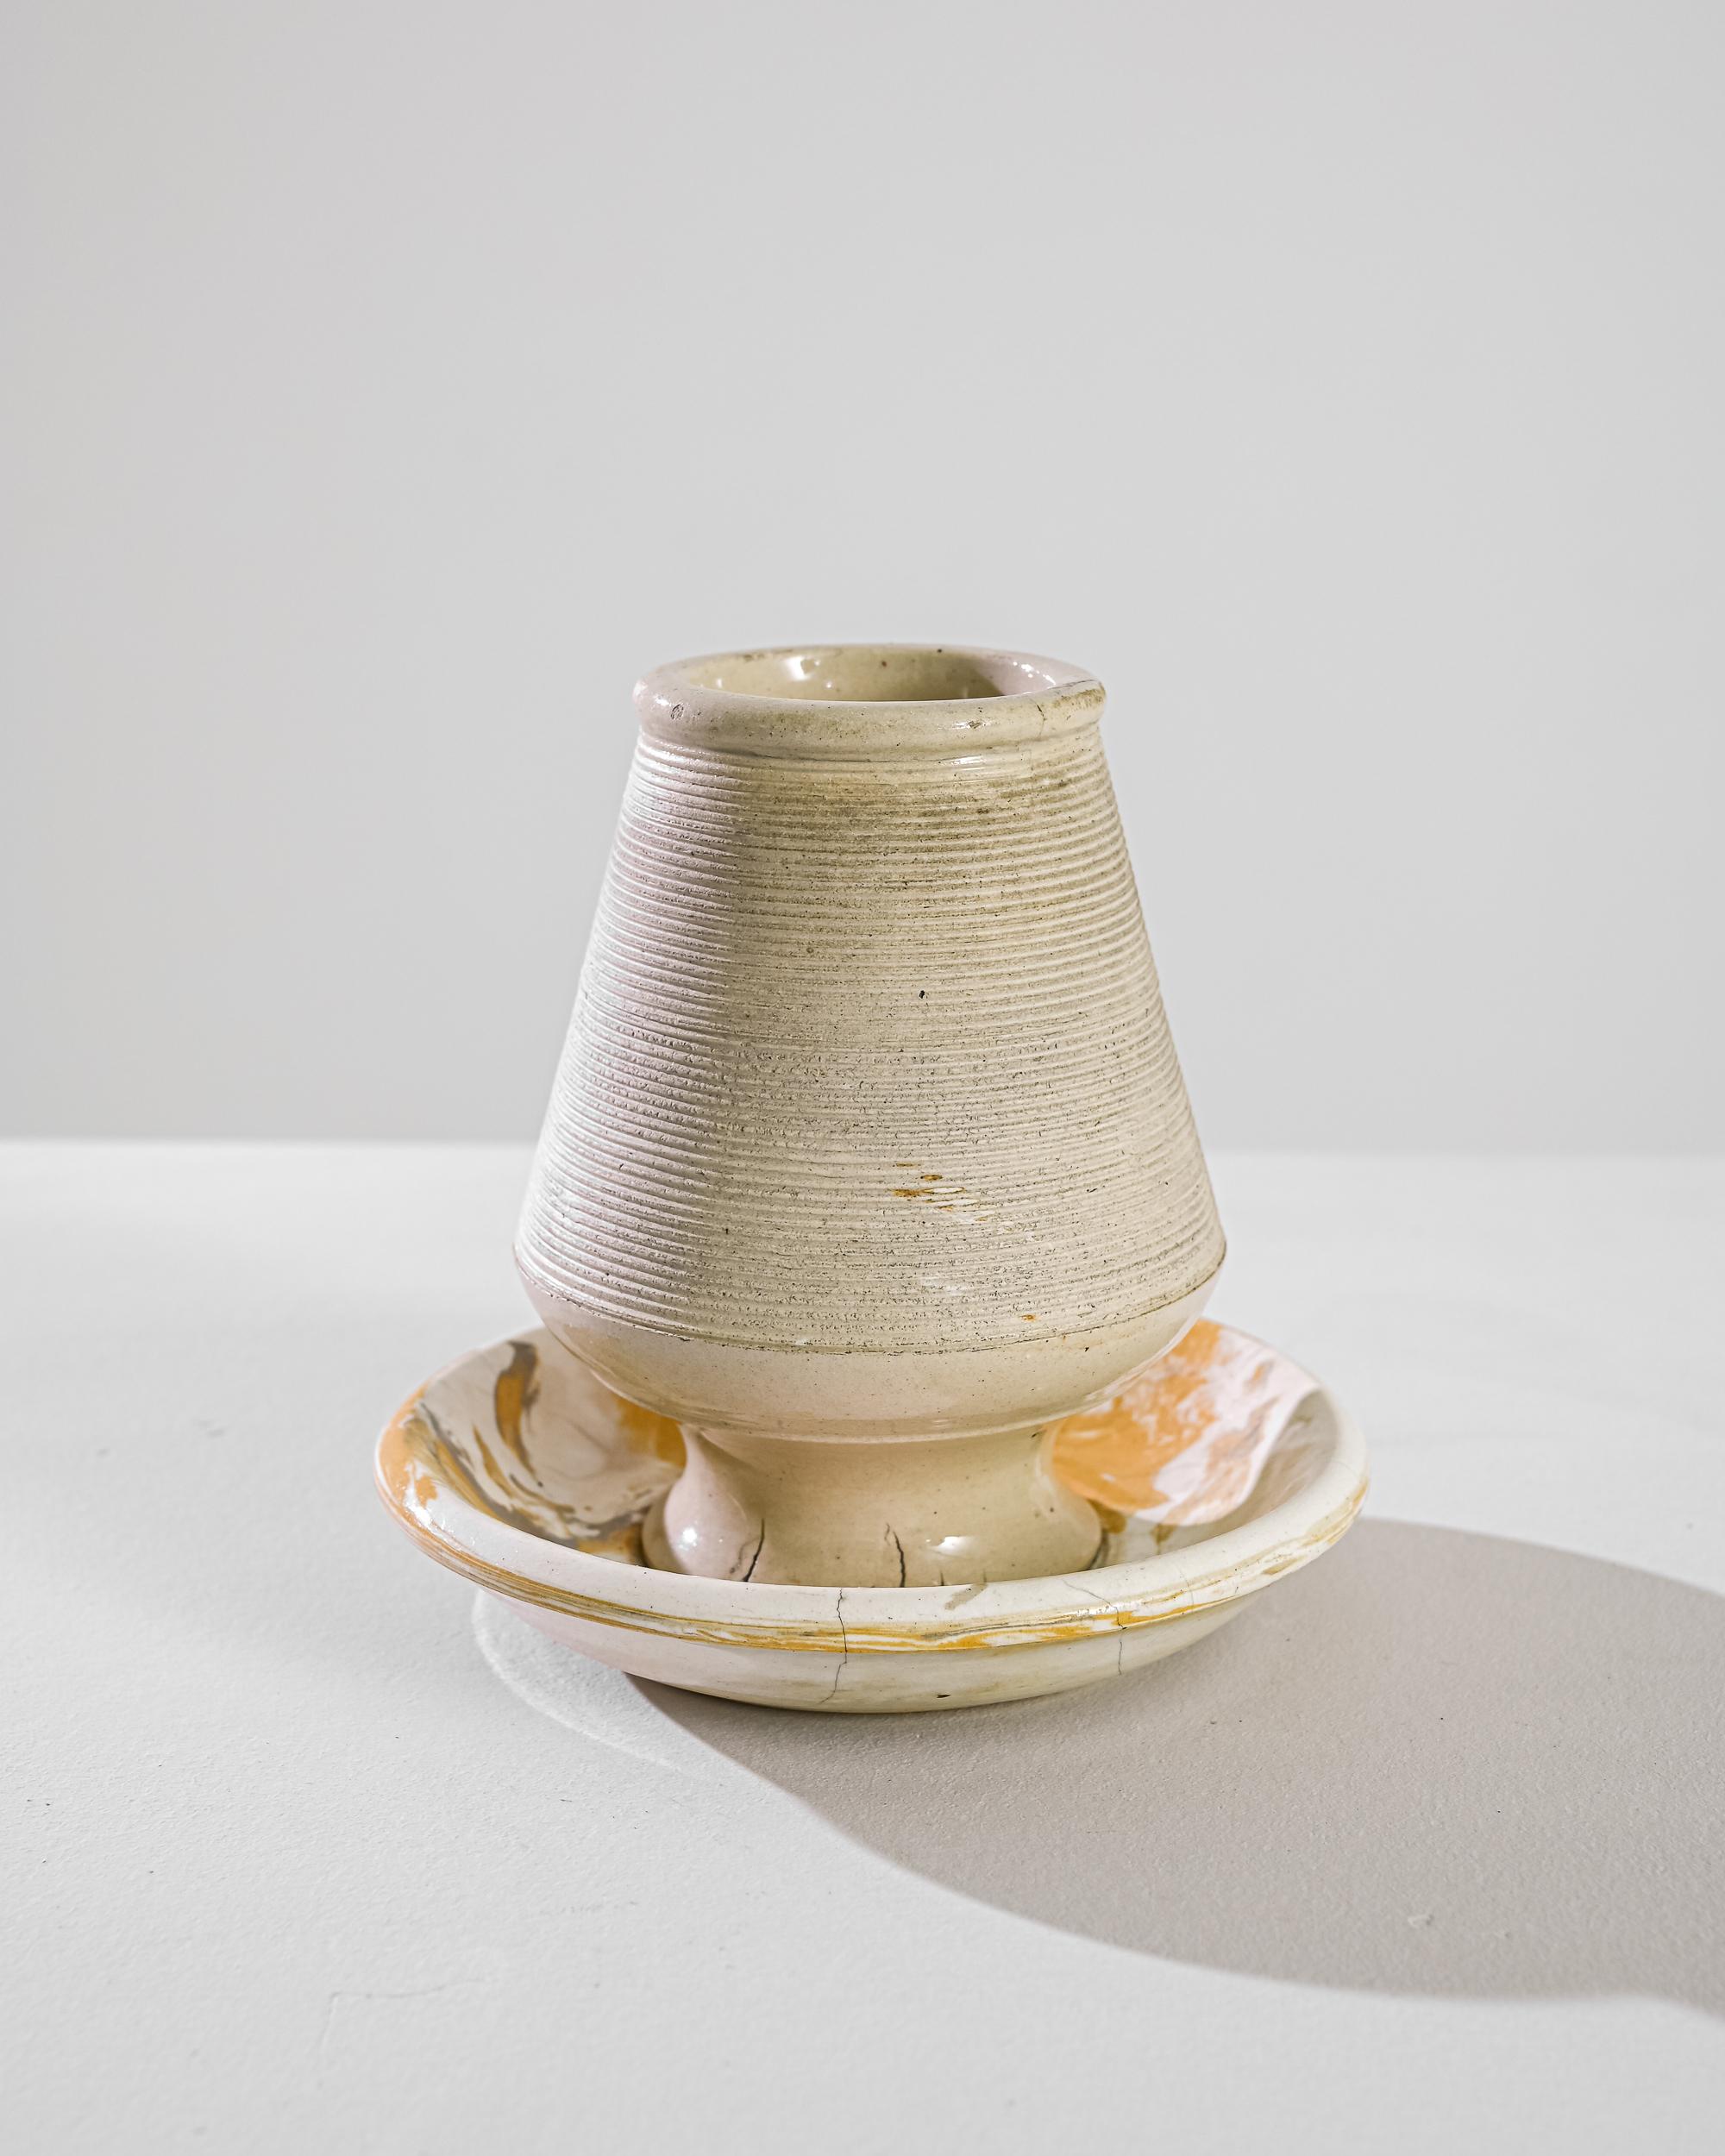 An intriguing vintage ceramic object. This earthy stoneware pyrogene was hand-thrown on the wheel, the combed ridges offer a convenient match strike surface. Once found in Parisian cafes, these quaint vessels serve as contemporary accents.